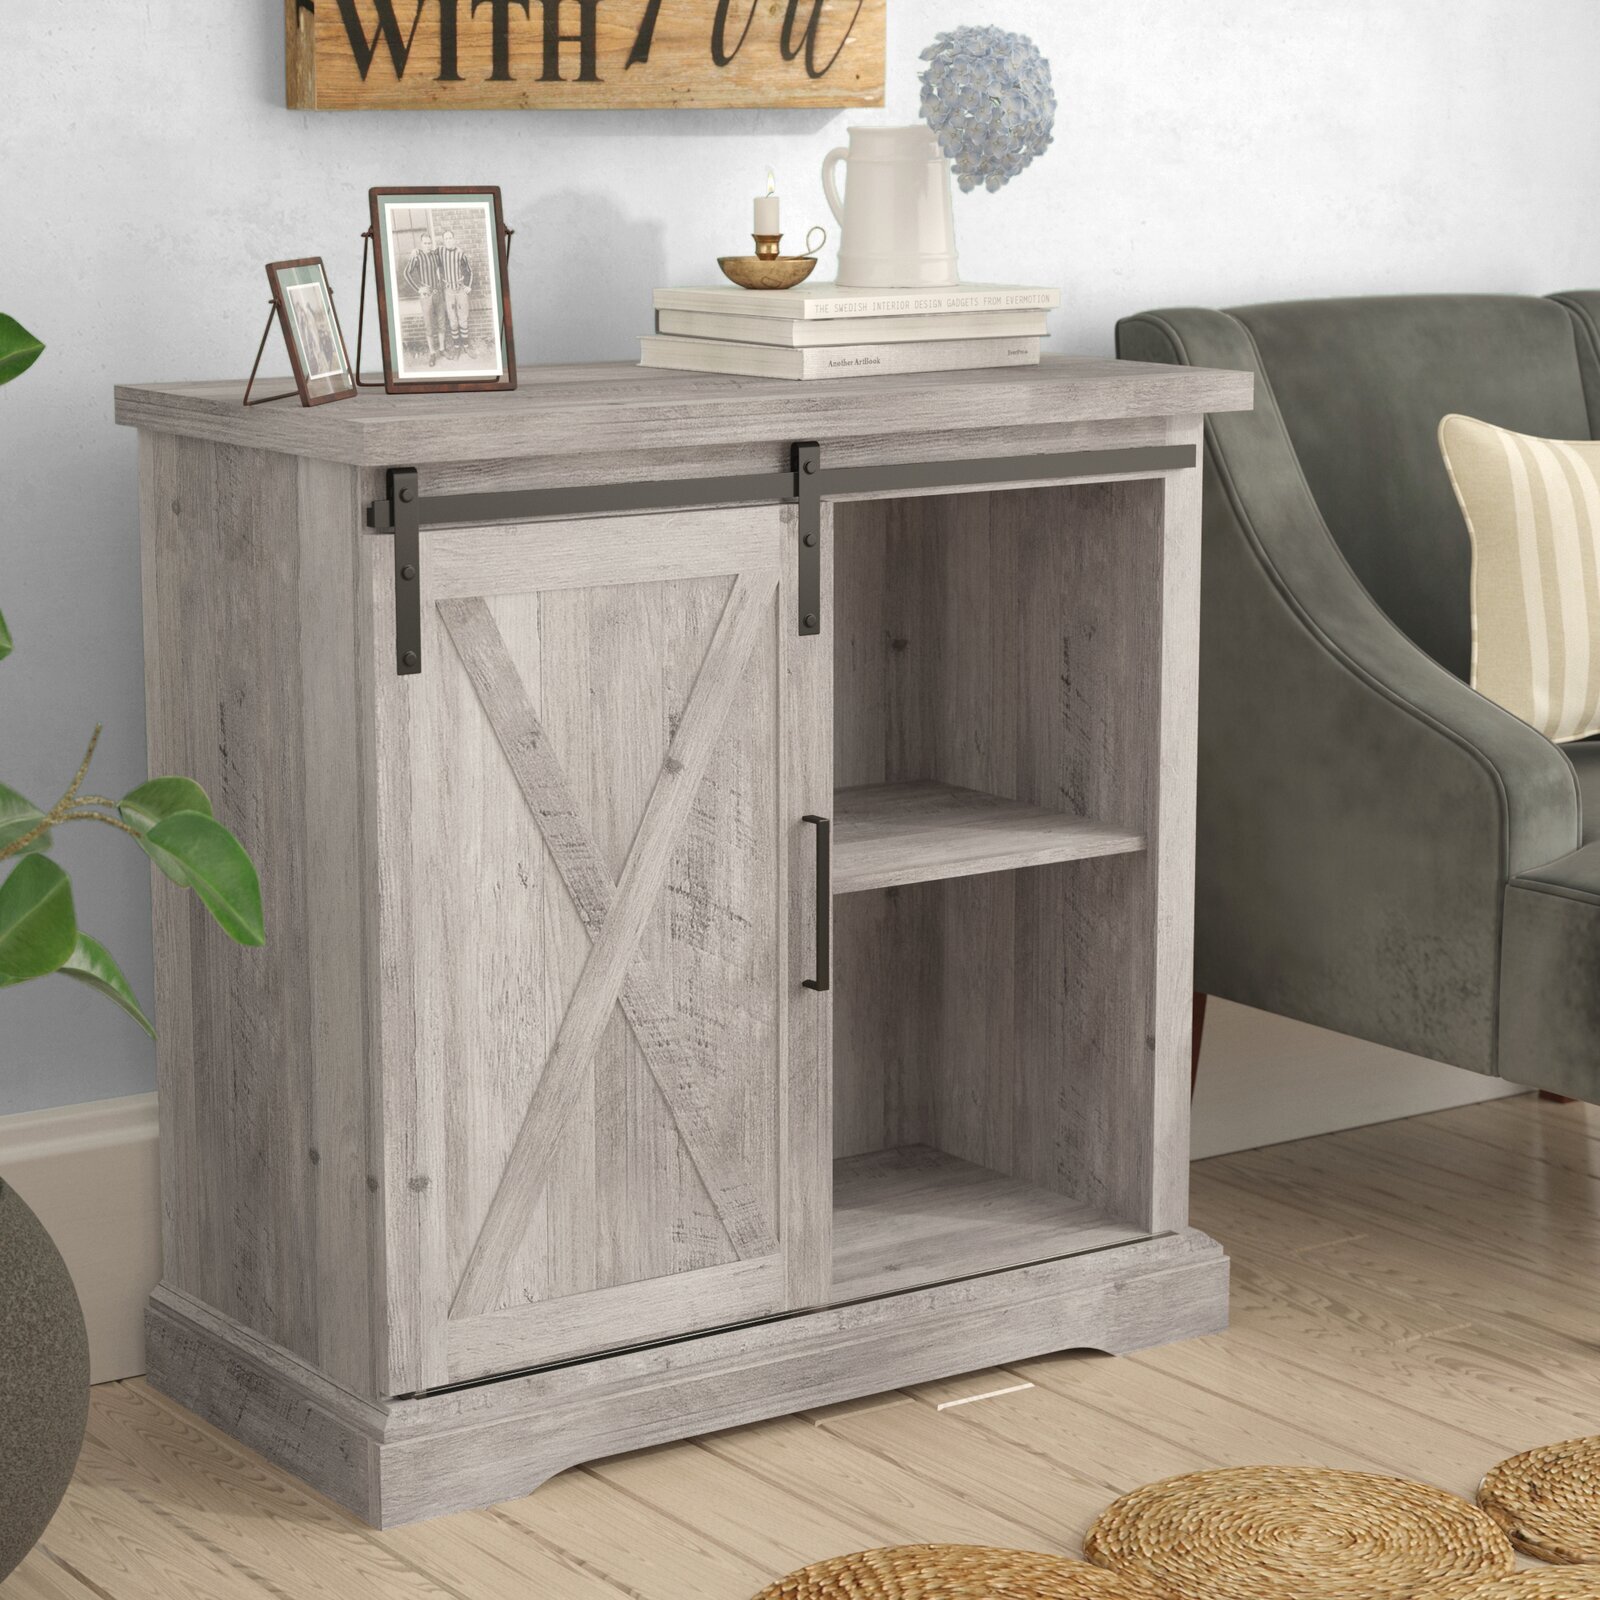 A shallow sideboard with a sliding farmhouse door